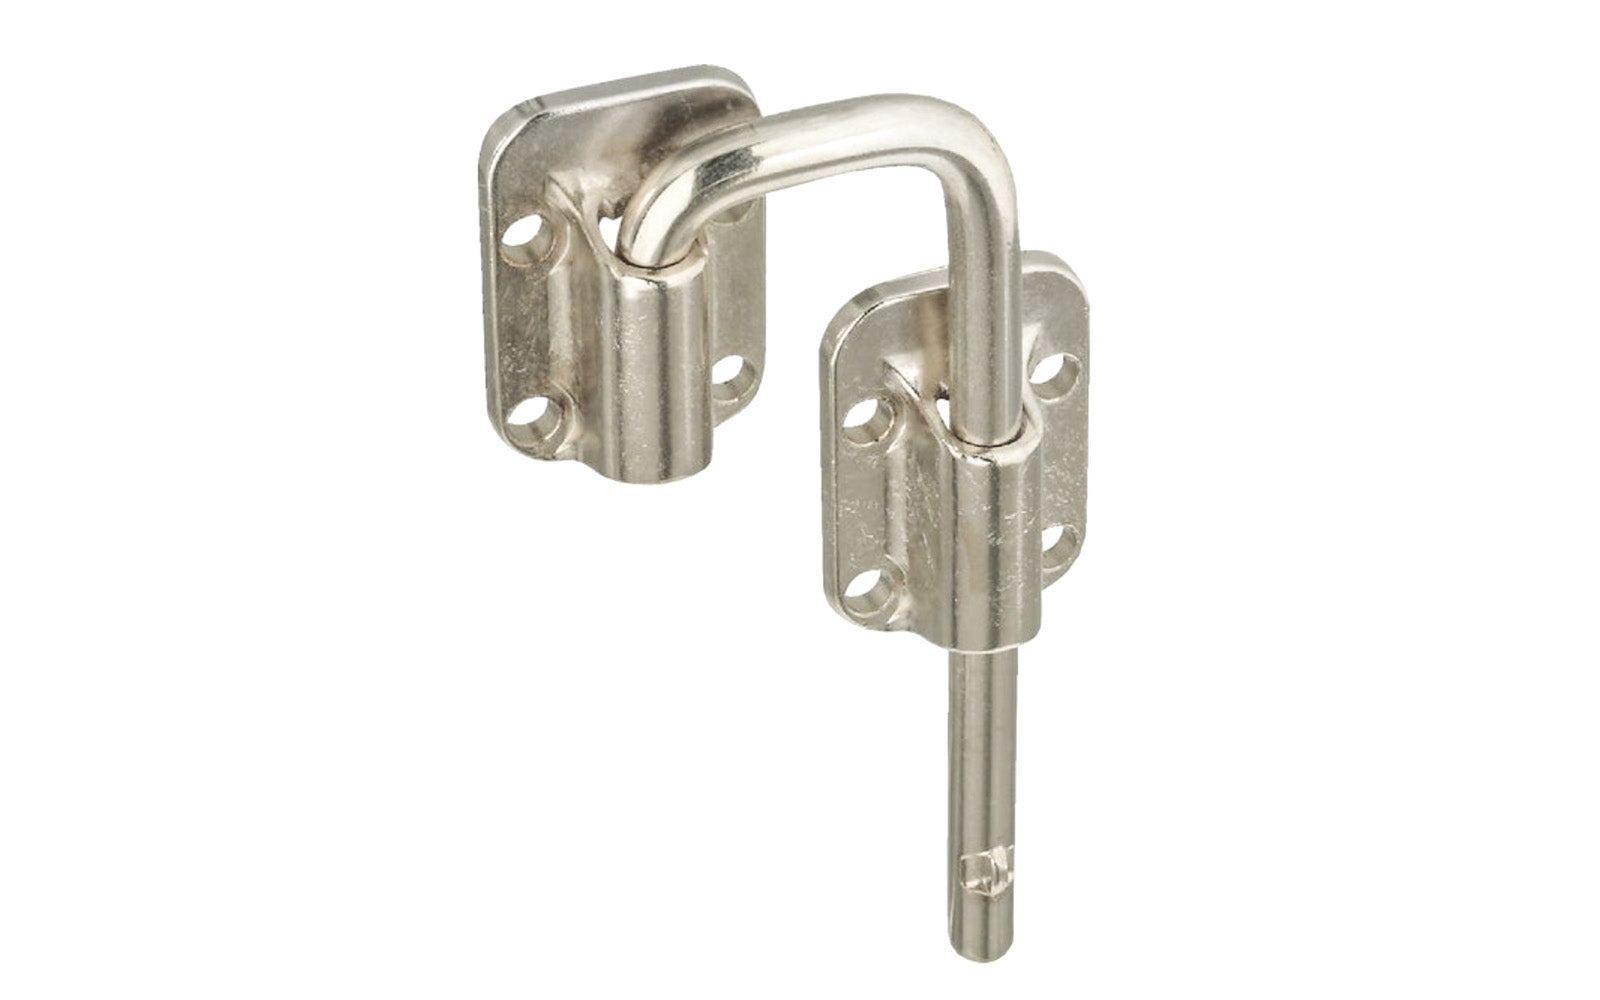 1-1/2" Nickel Slide Bolt Latch is designed to secure surface applications on doors, gates, sheds, metal or wood sliding doors, cabinets. Product features a long extension bar that allows product to reach over moldings, trims, etc. May work on surface mount & corner applications. National Hardware Model No. N238-972.